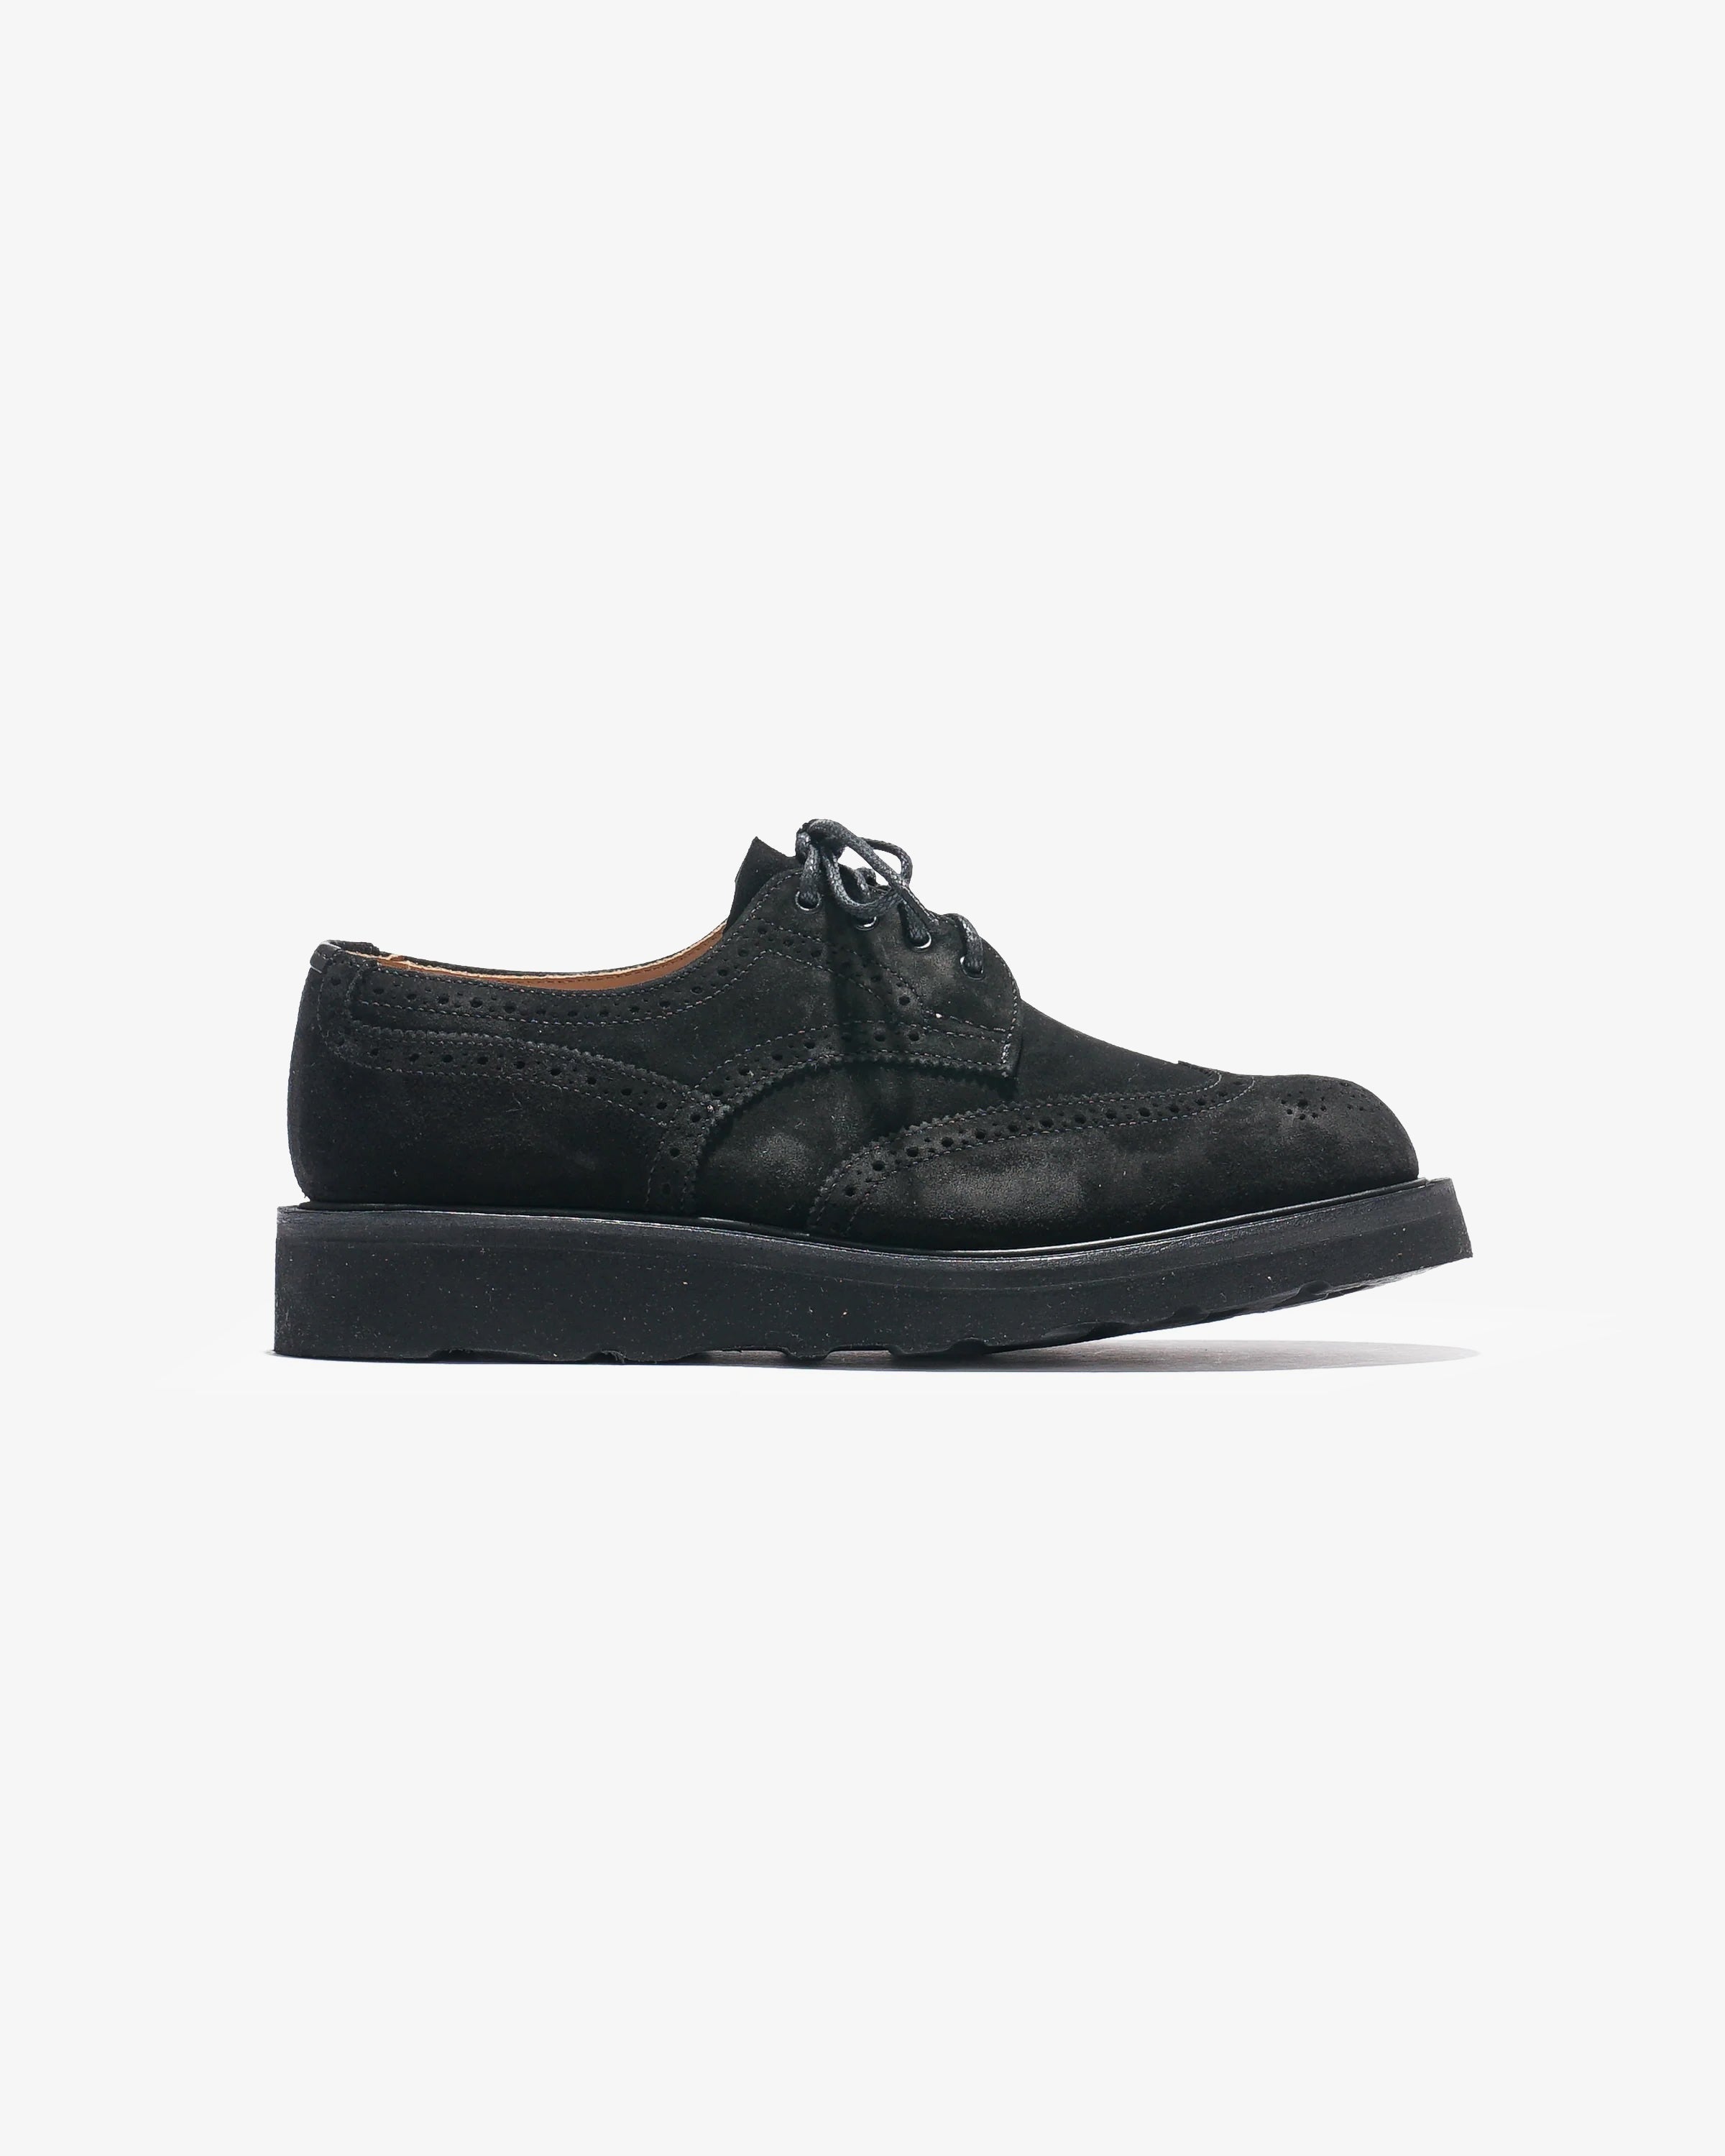 Tricker's x Nepenthes Asymmetric Gibson Brogues - Moreflex Sole - Black Suede – Tricker's x Nepenthes – Nepenthes London